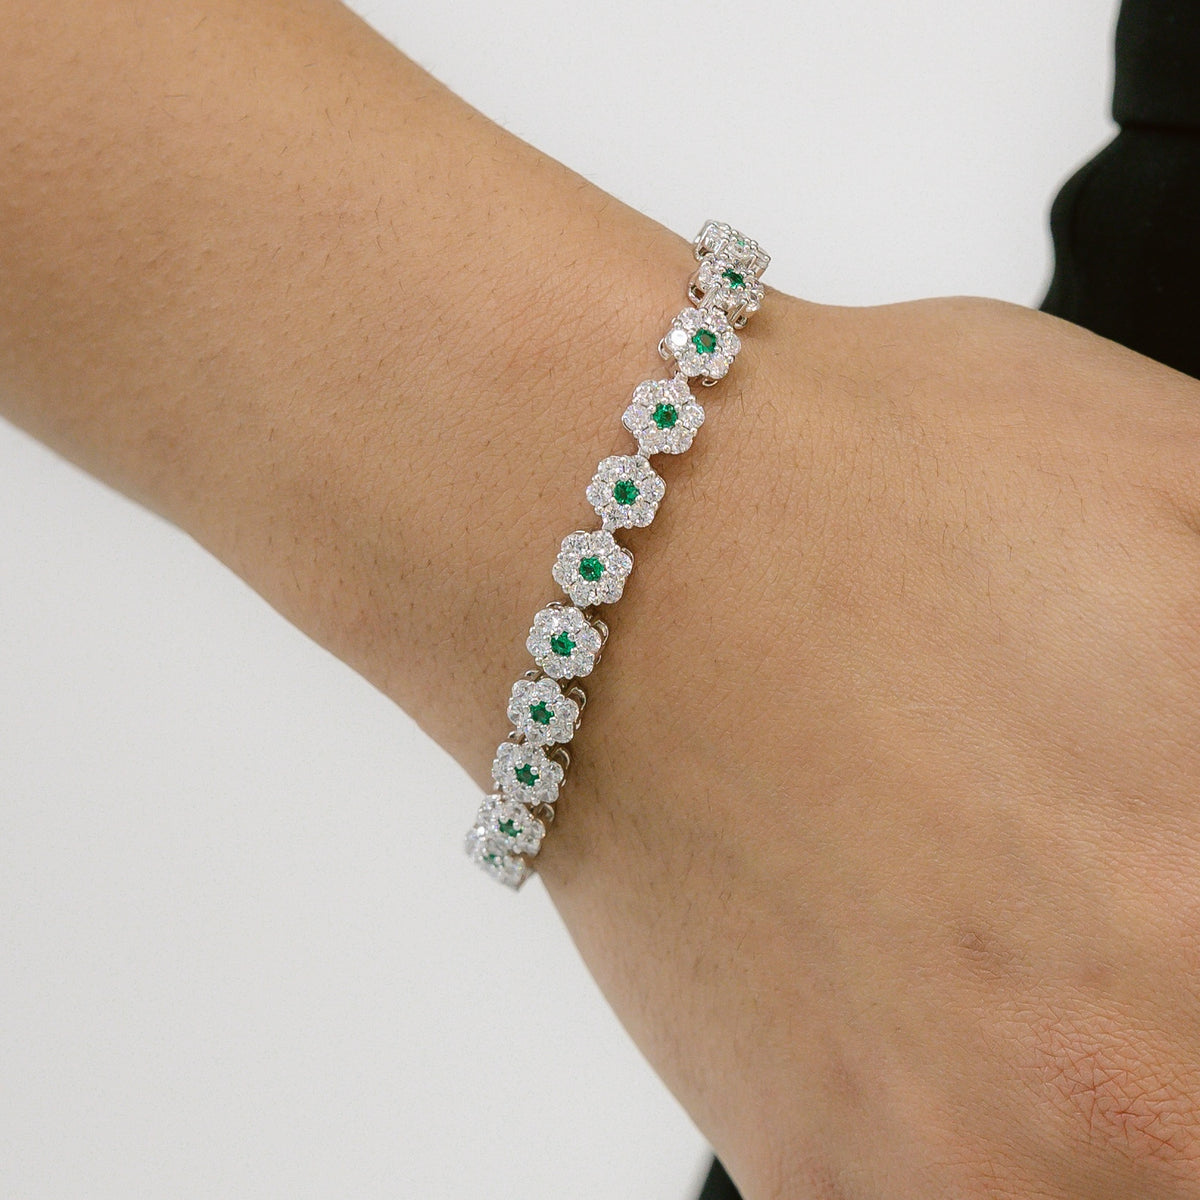 Handmade March Bracelet Daisy with Enamel - Pearl and Turquoise Bead in  Macrame Cotton Cord